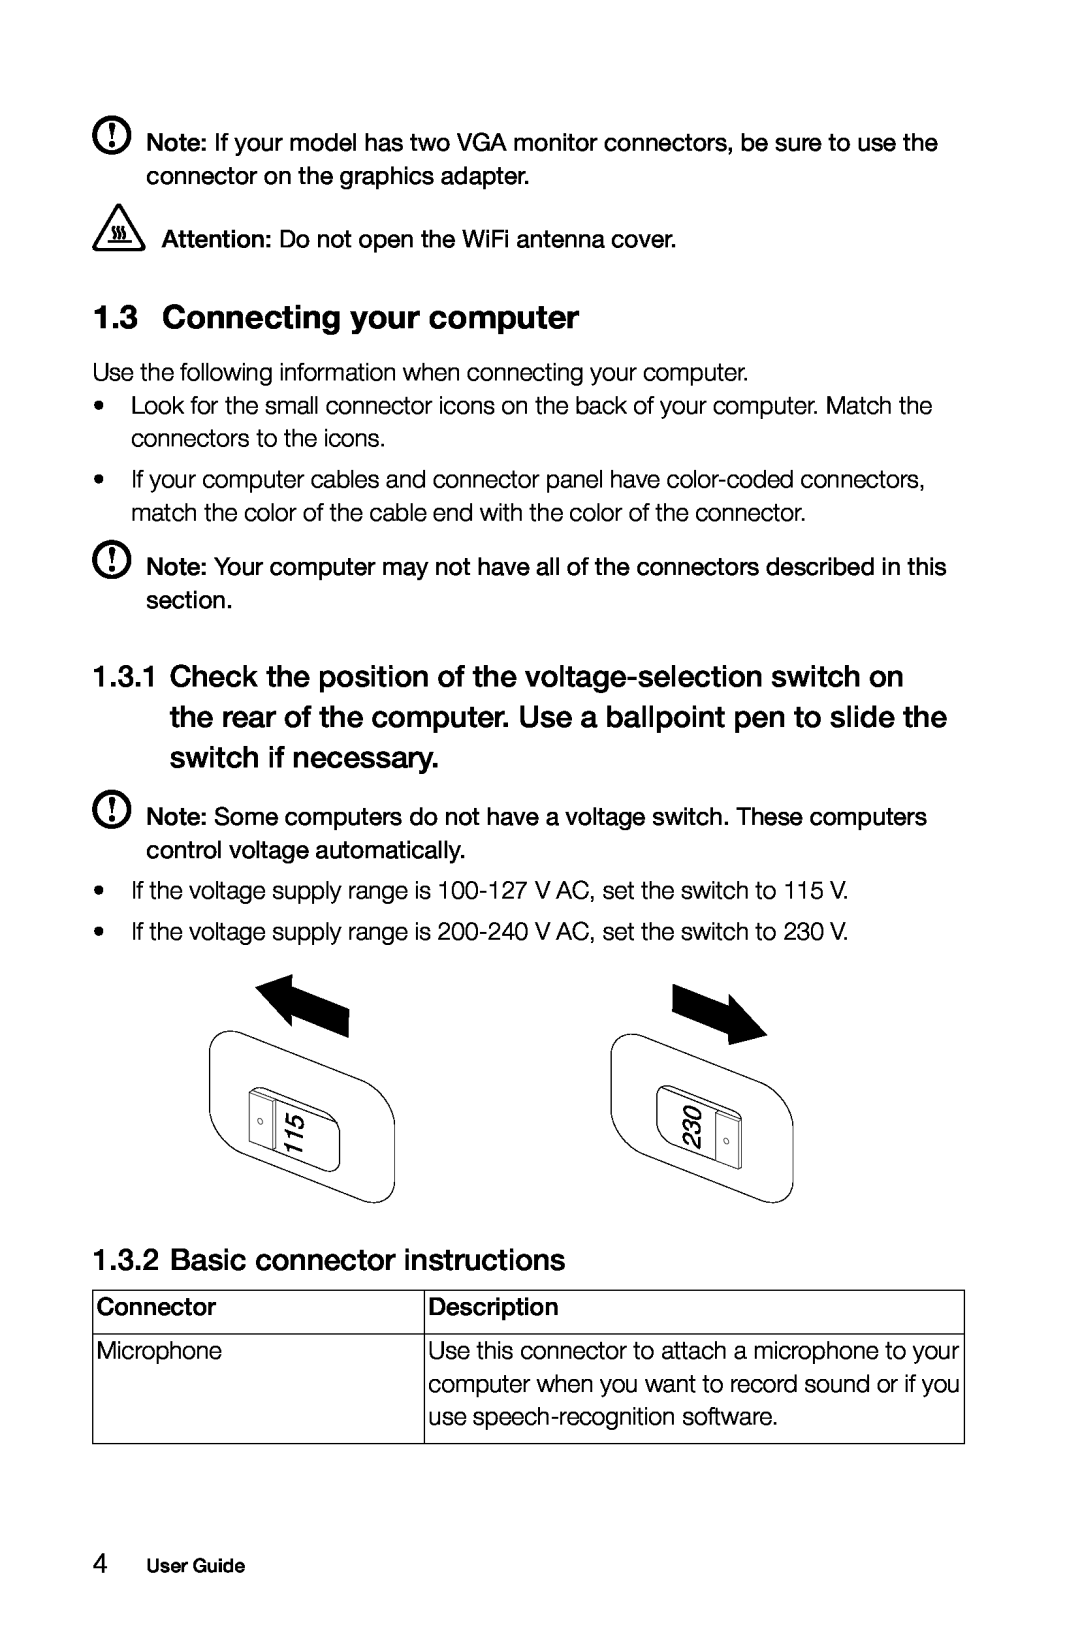 Lenovo H5S manual Connecting your computer, Basic connector instructions 